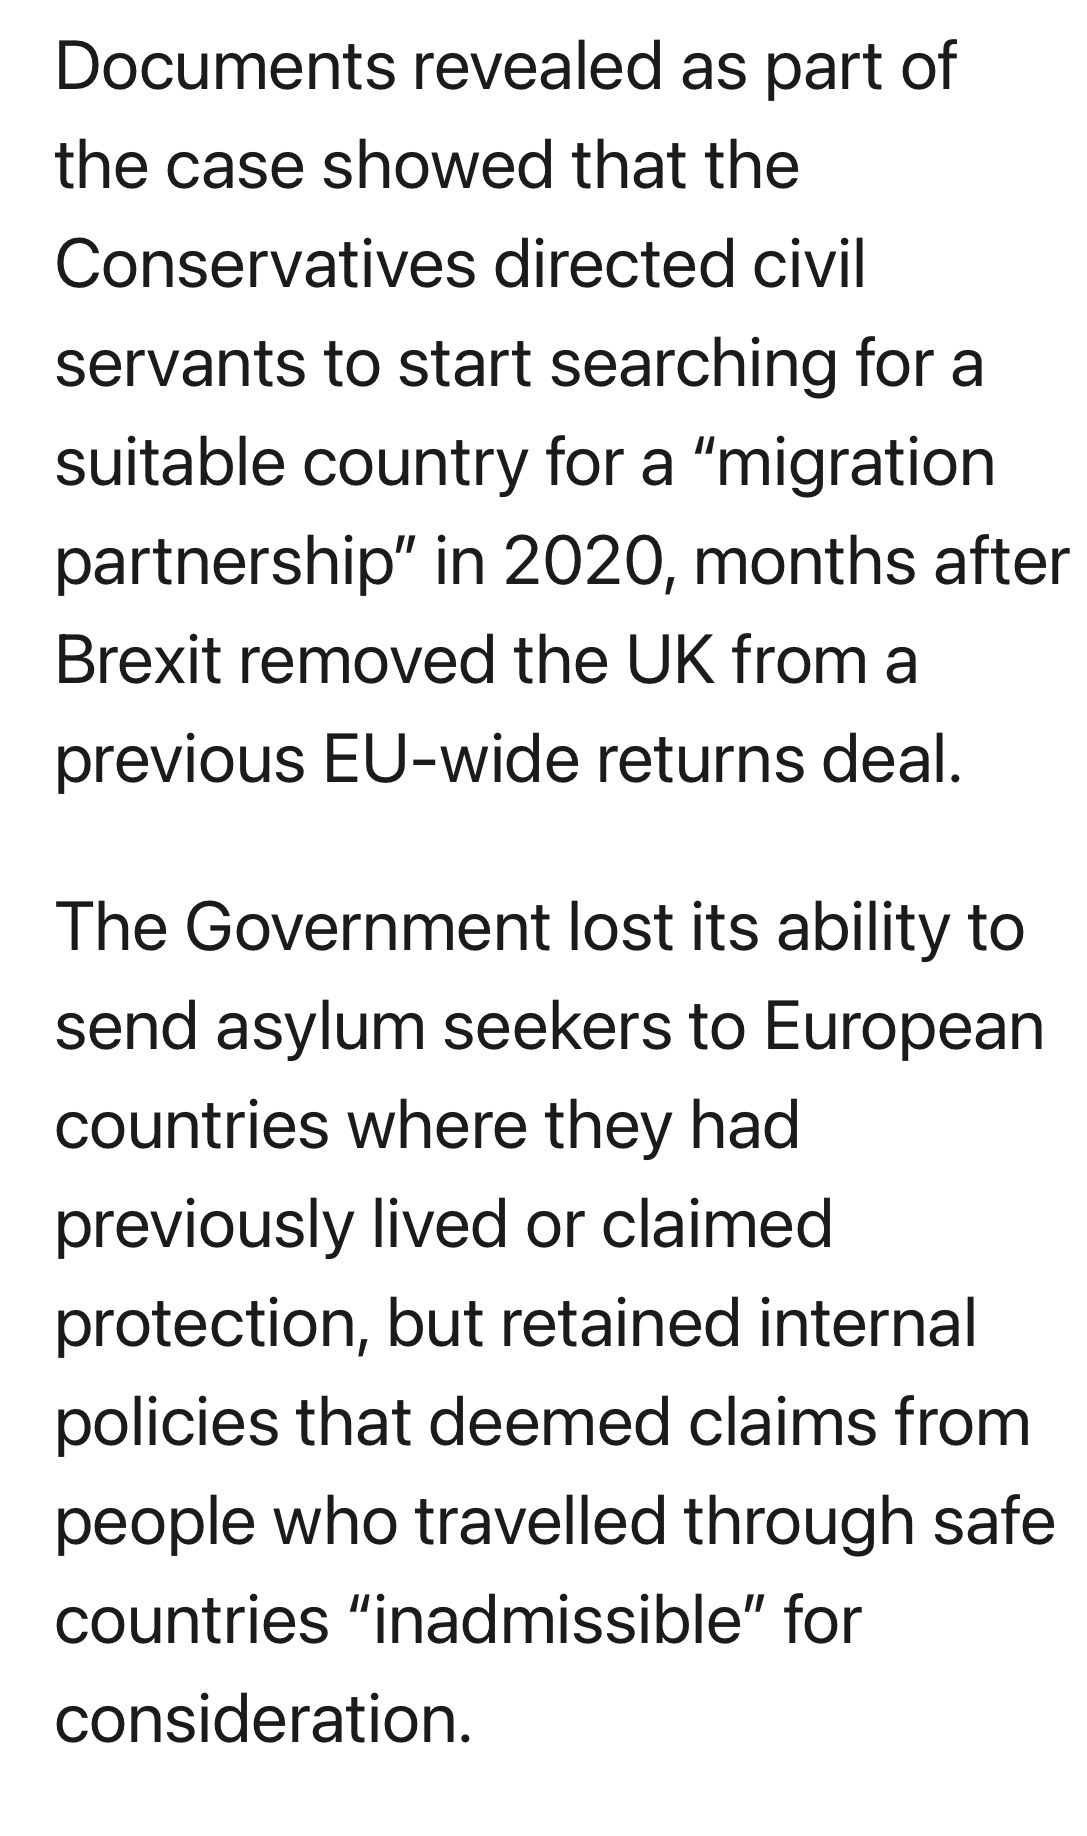 From inews.co.uk&10;&10;Documents revealed as part of the case showed that the Conservatives directed civil servants to start searching for a suitable country for a “migration partnership” in 2020, months after Brexit removed the UK from a previous EU-wide returns deal.&10;&10;The Government lost its ability to send asylum seekers to European countries where they had previously lived or claimed protection, but retained internal policies that deemed claims from people who travelled through safe countries “inadmissible” for consideration.